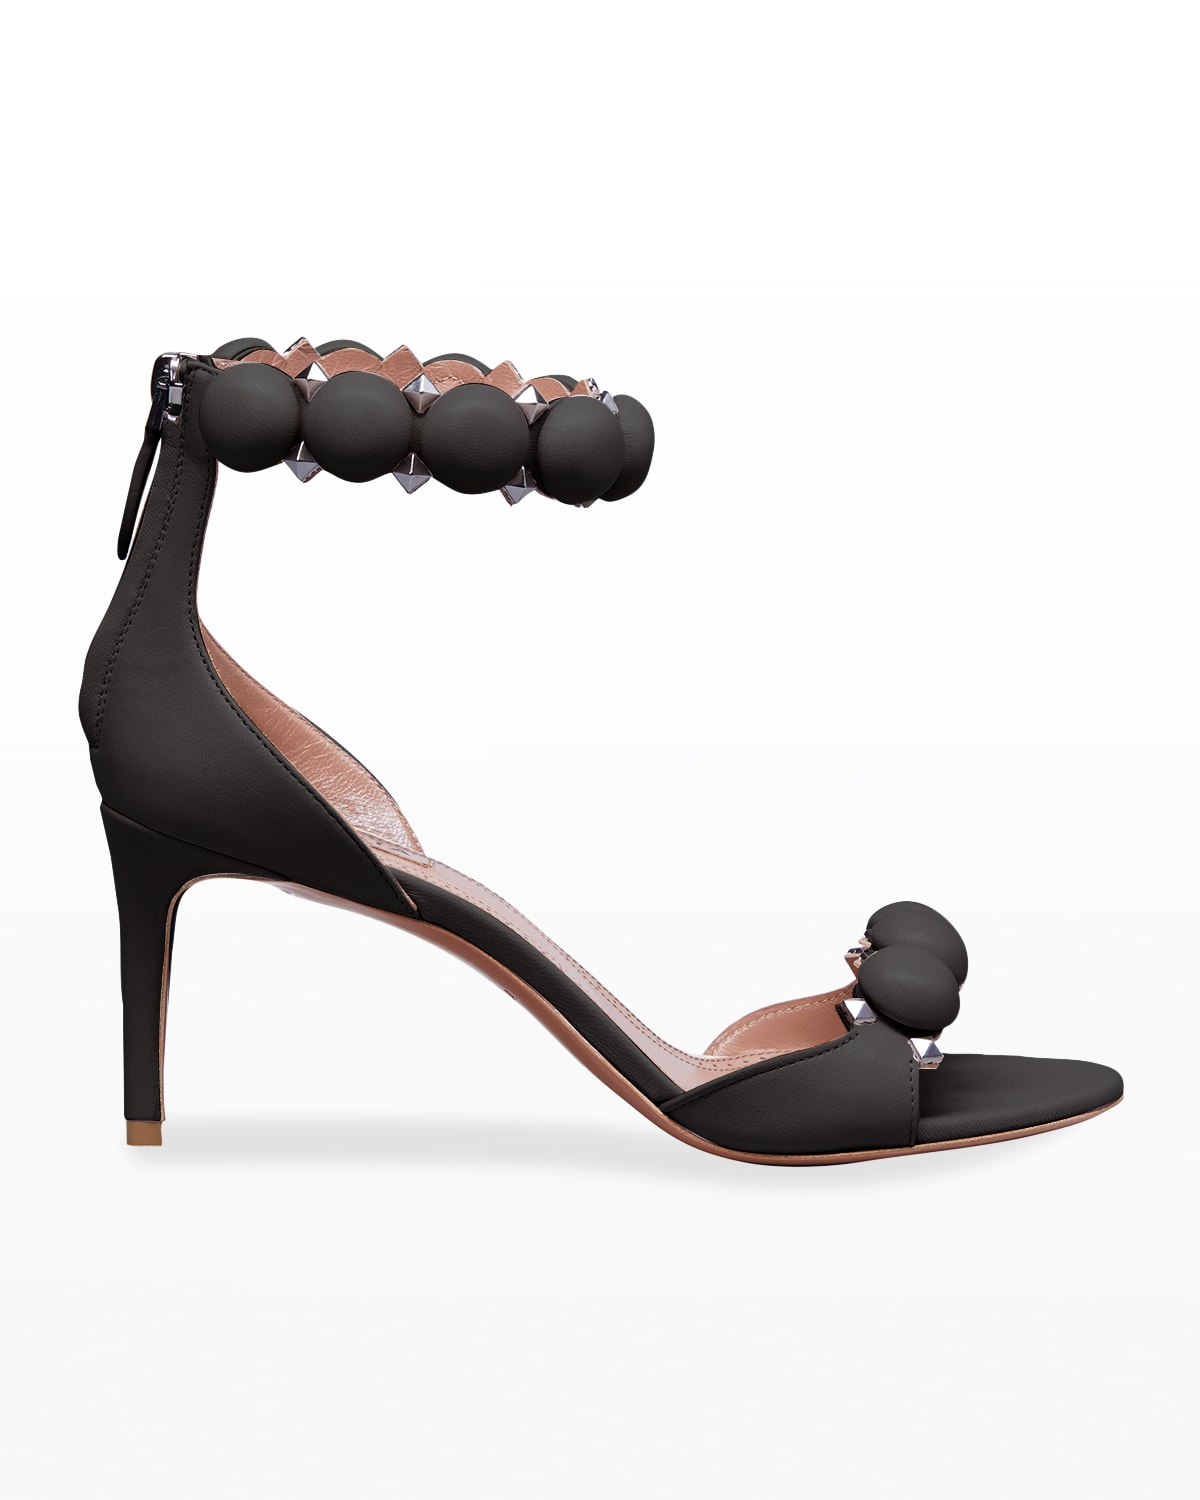 Ladies Spot On Heeled Ankle Strap Sandal with 'Stitched Vamp' 